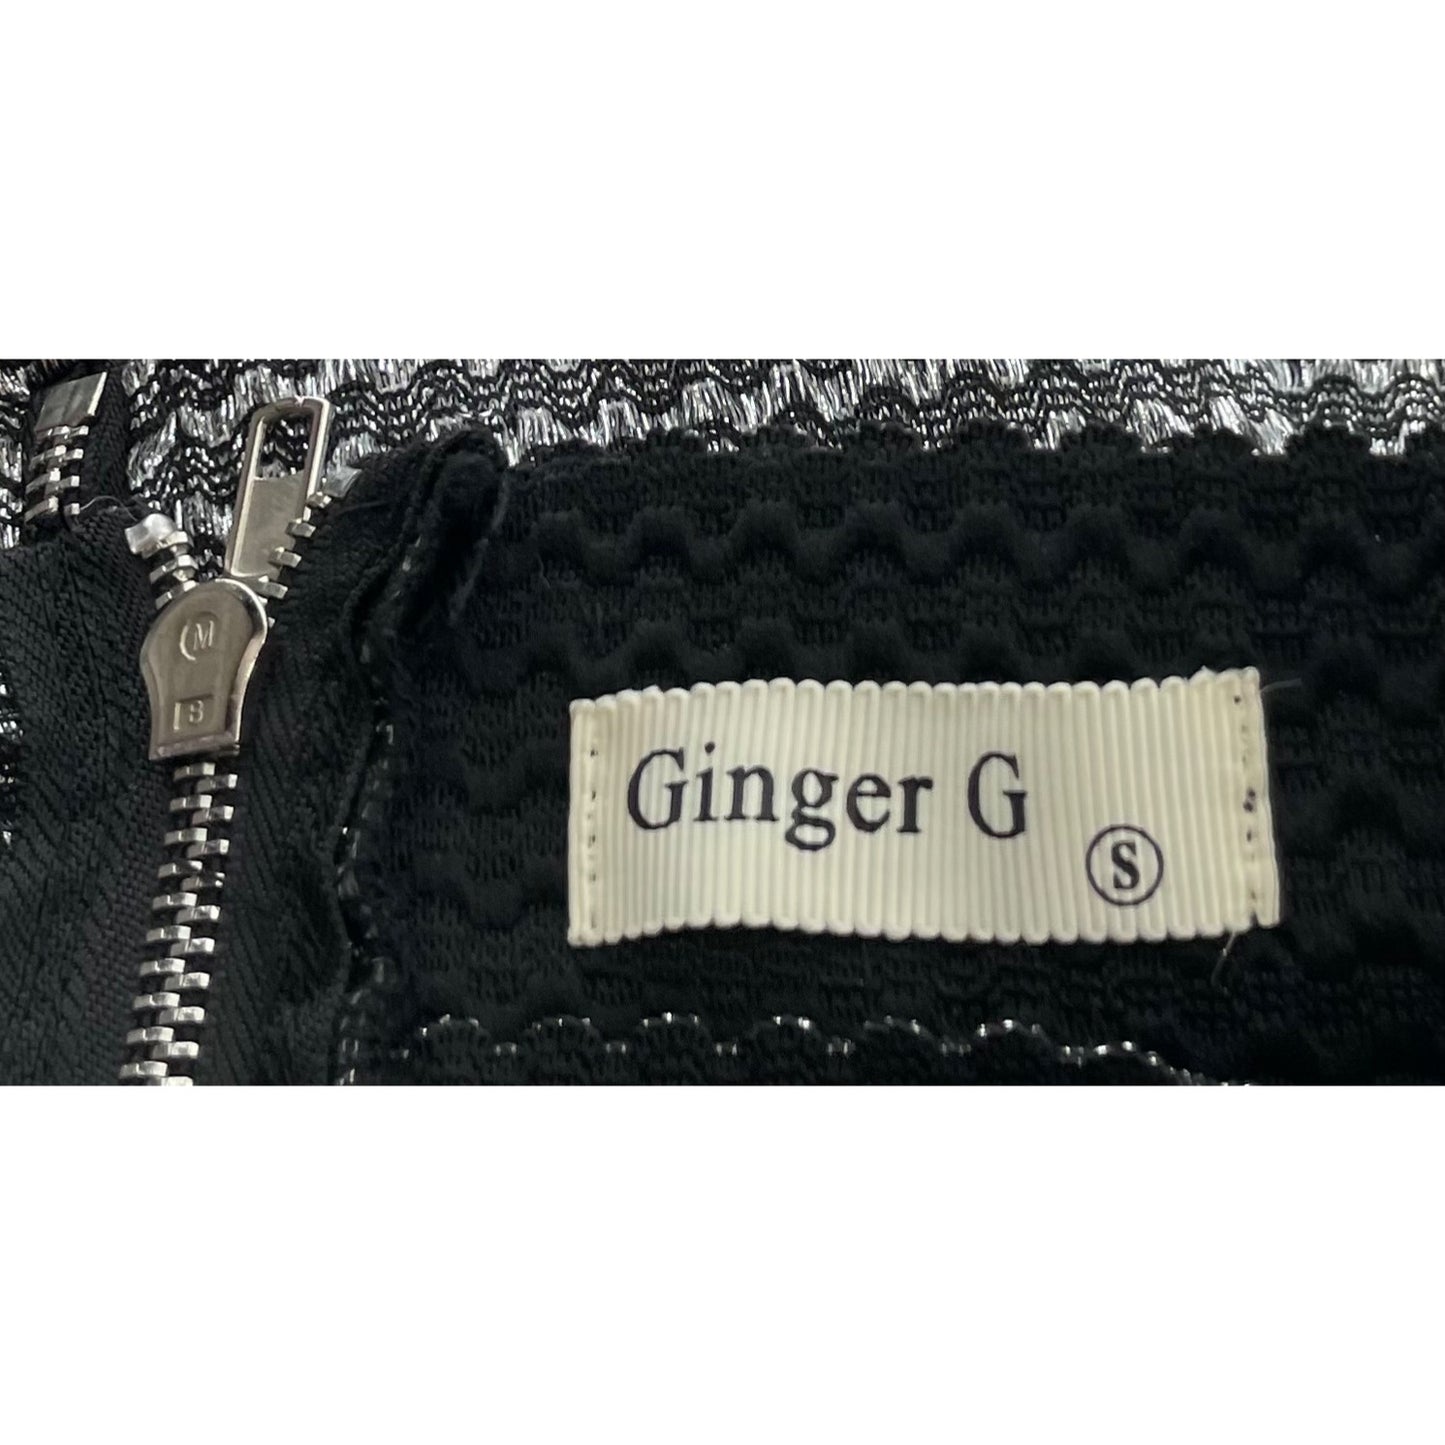 Ginger G Women's Size Small Black/Silver Sparkly Metallic A-Line Mini Skirt